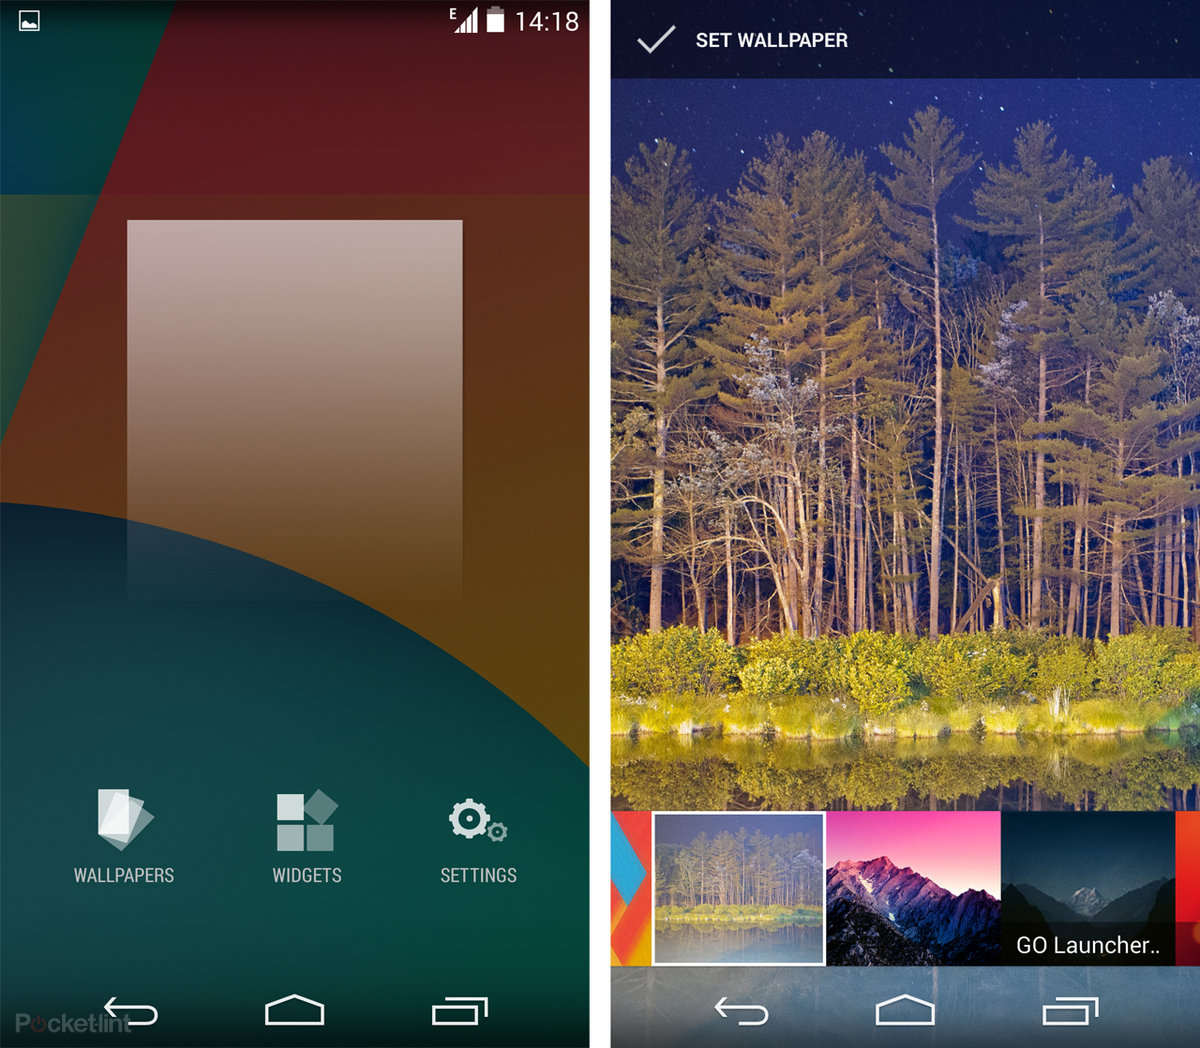 Android 4 4 Kitkat Review Image - Nexus 5 Forest , HD Wallpaper & Backgrounds